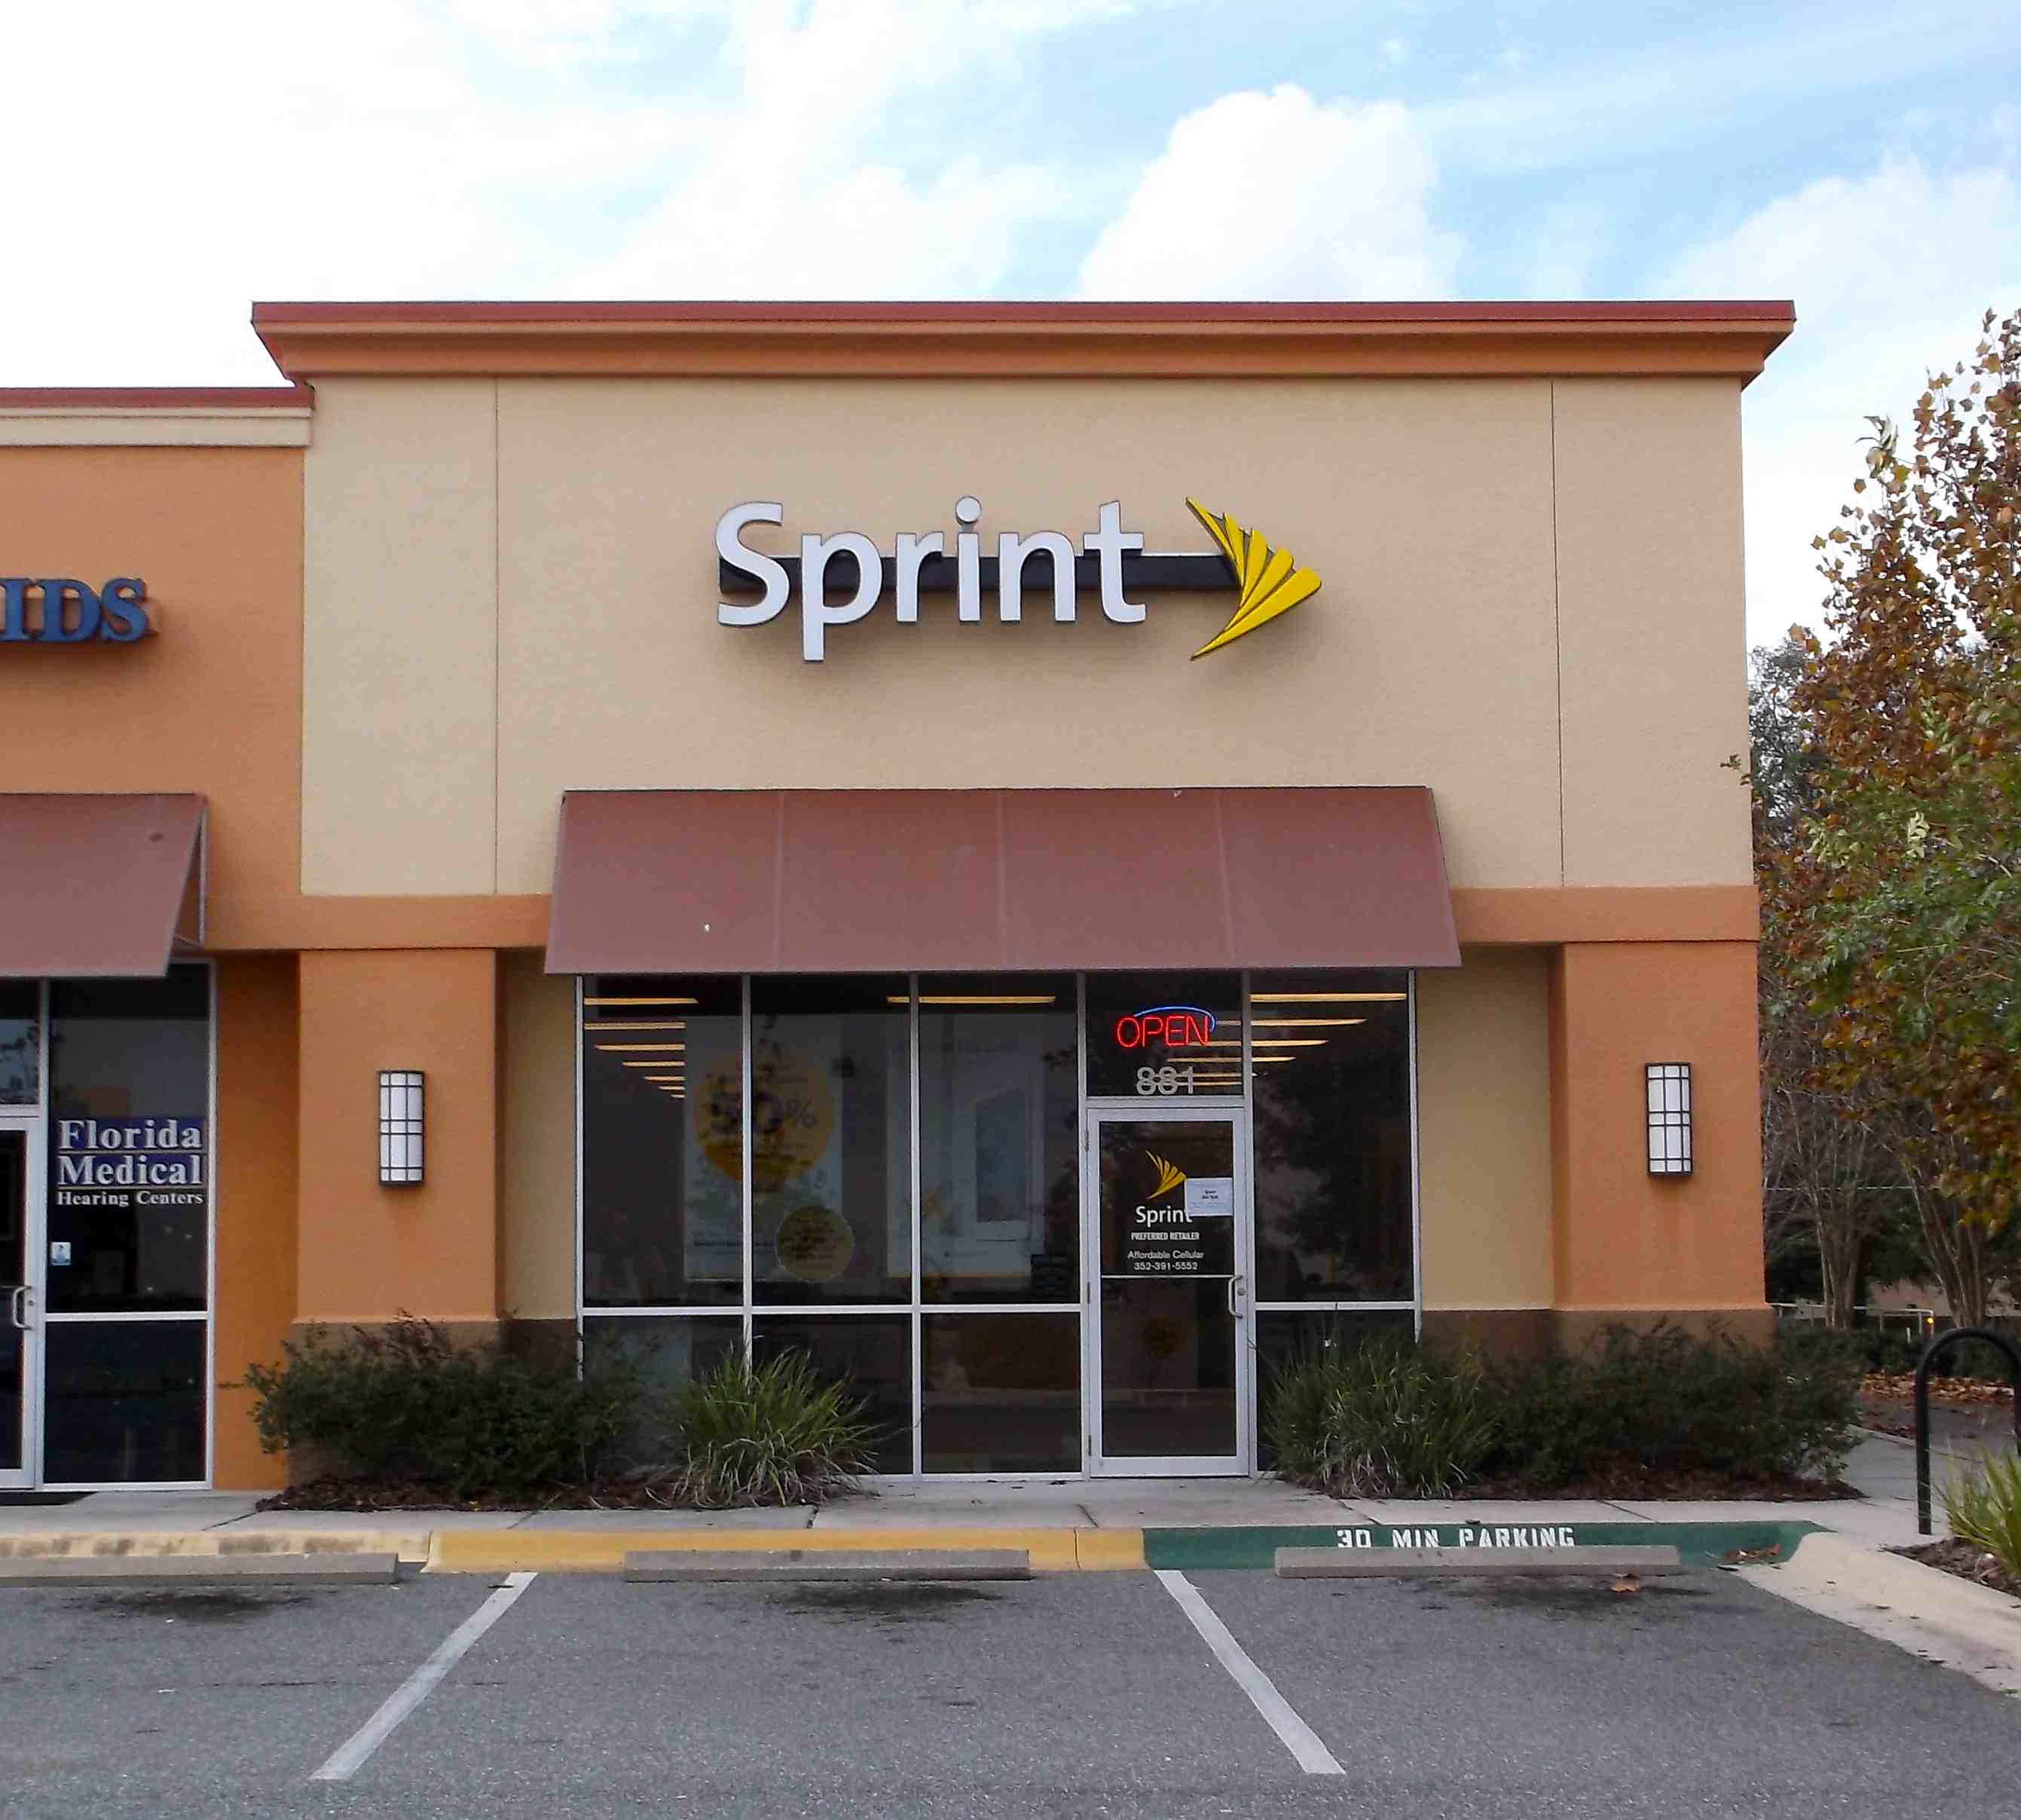 Trio suspected of smashing Sprint store window, stealing ...